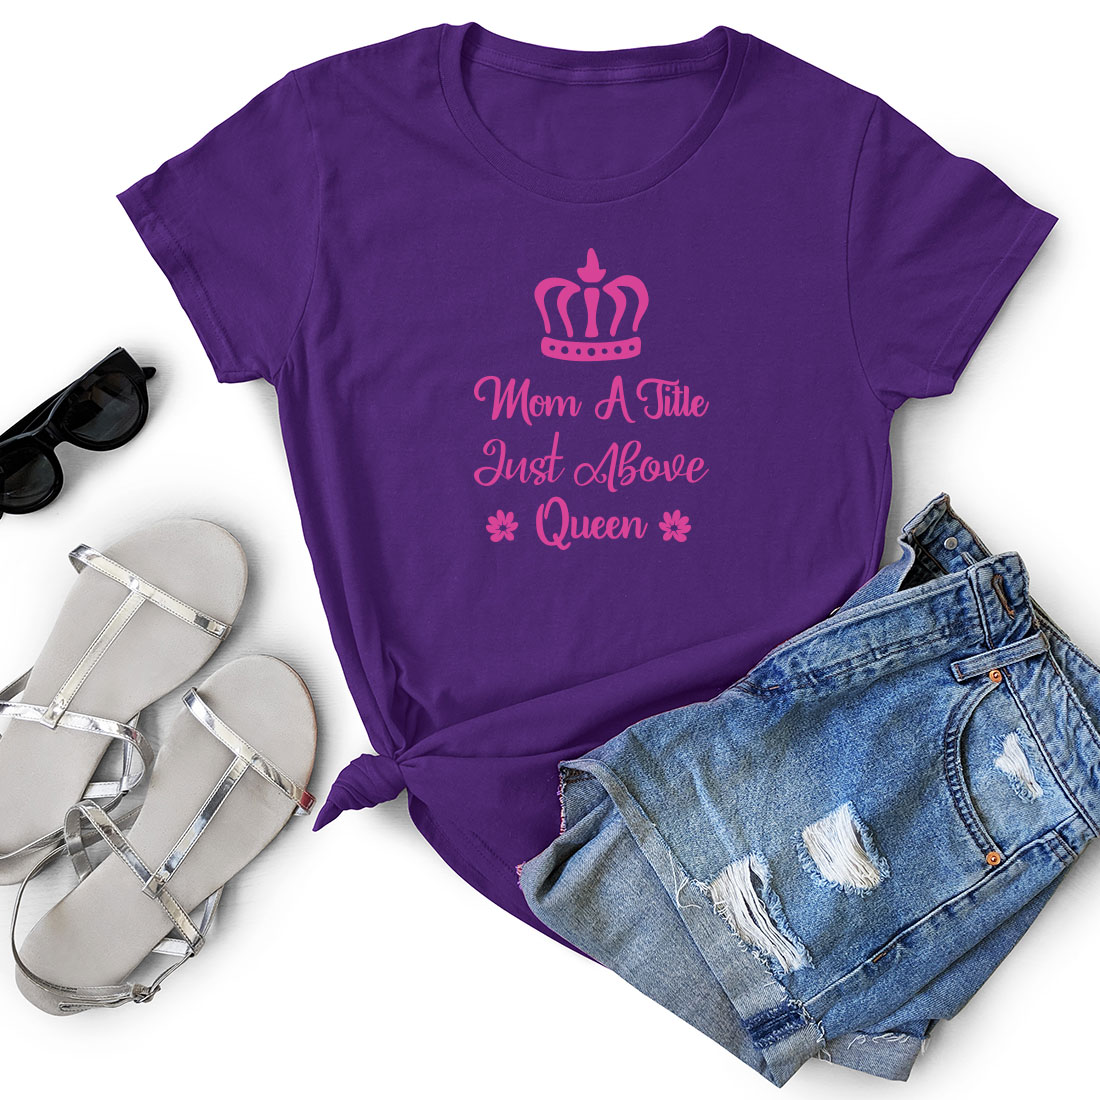 Women's t - shirt with a crown on it.